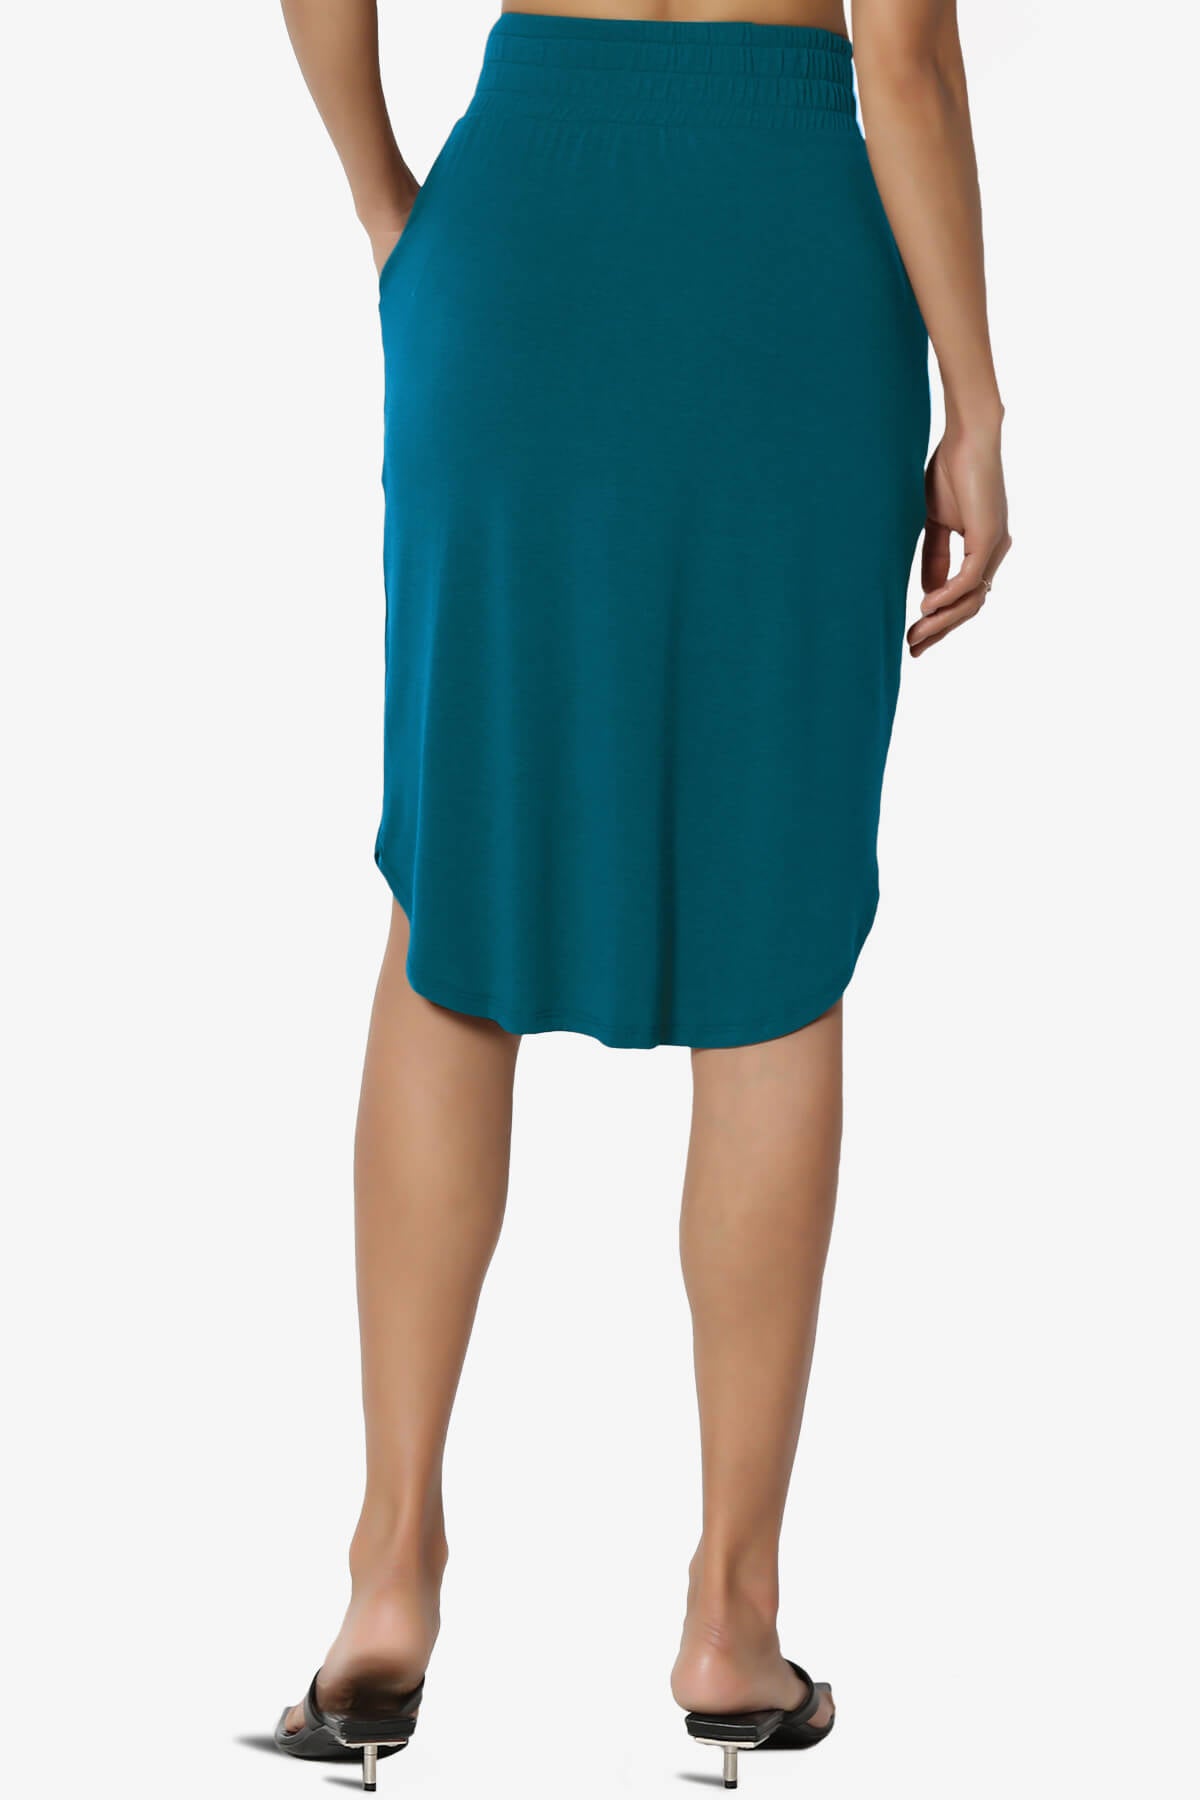 Load image into Gallery viewer, Hadyn Casual Elastic High Waist Straight Skirt TEAL_2
